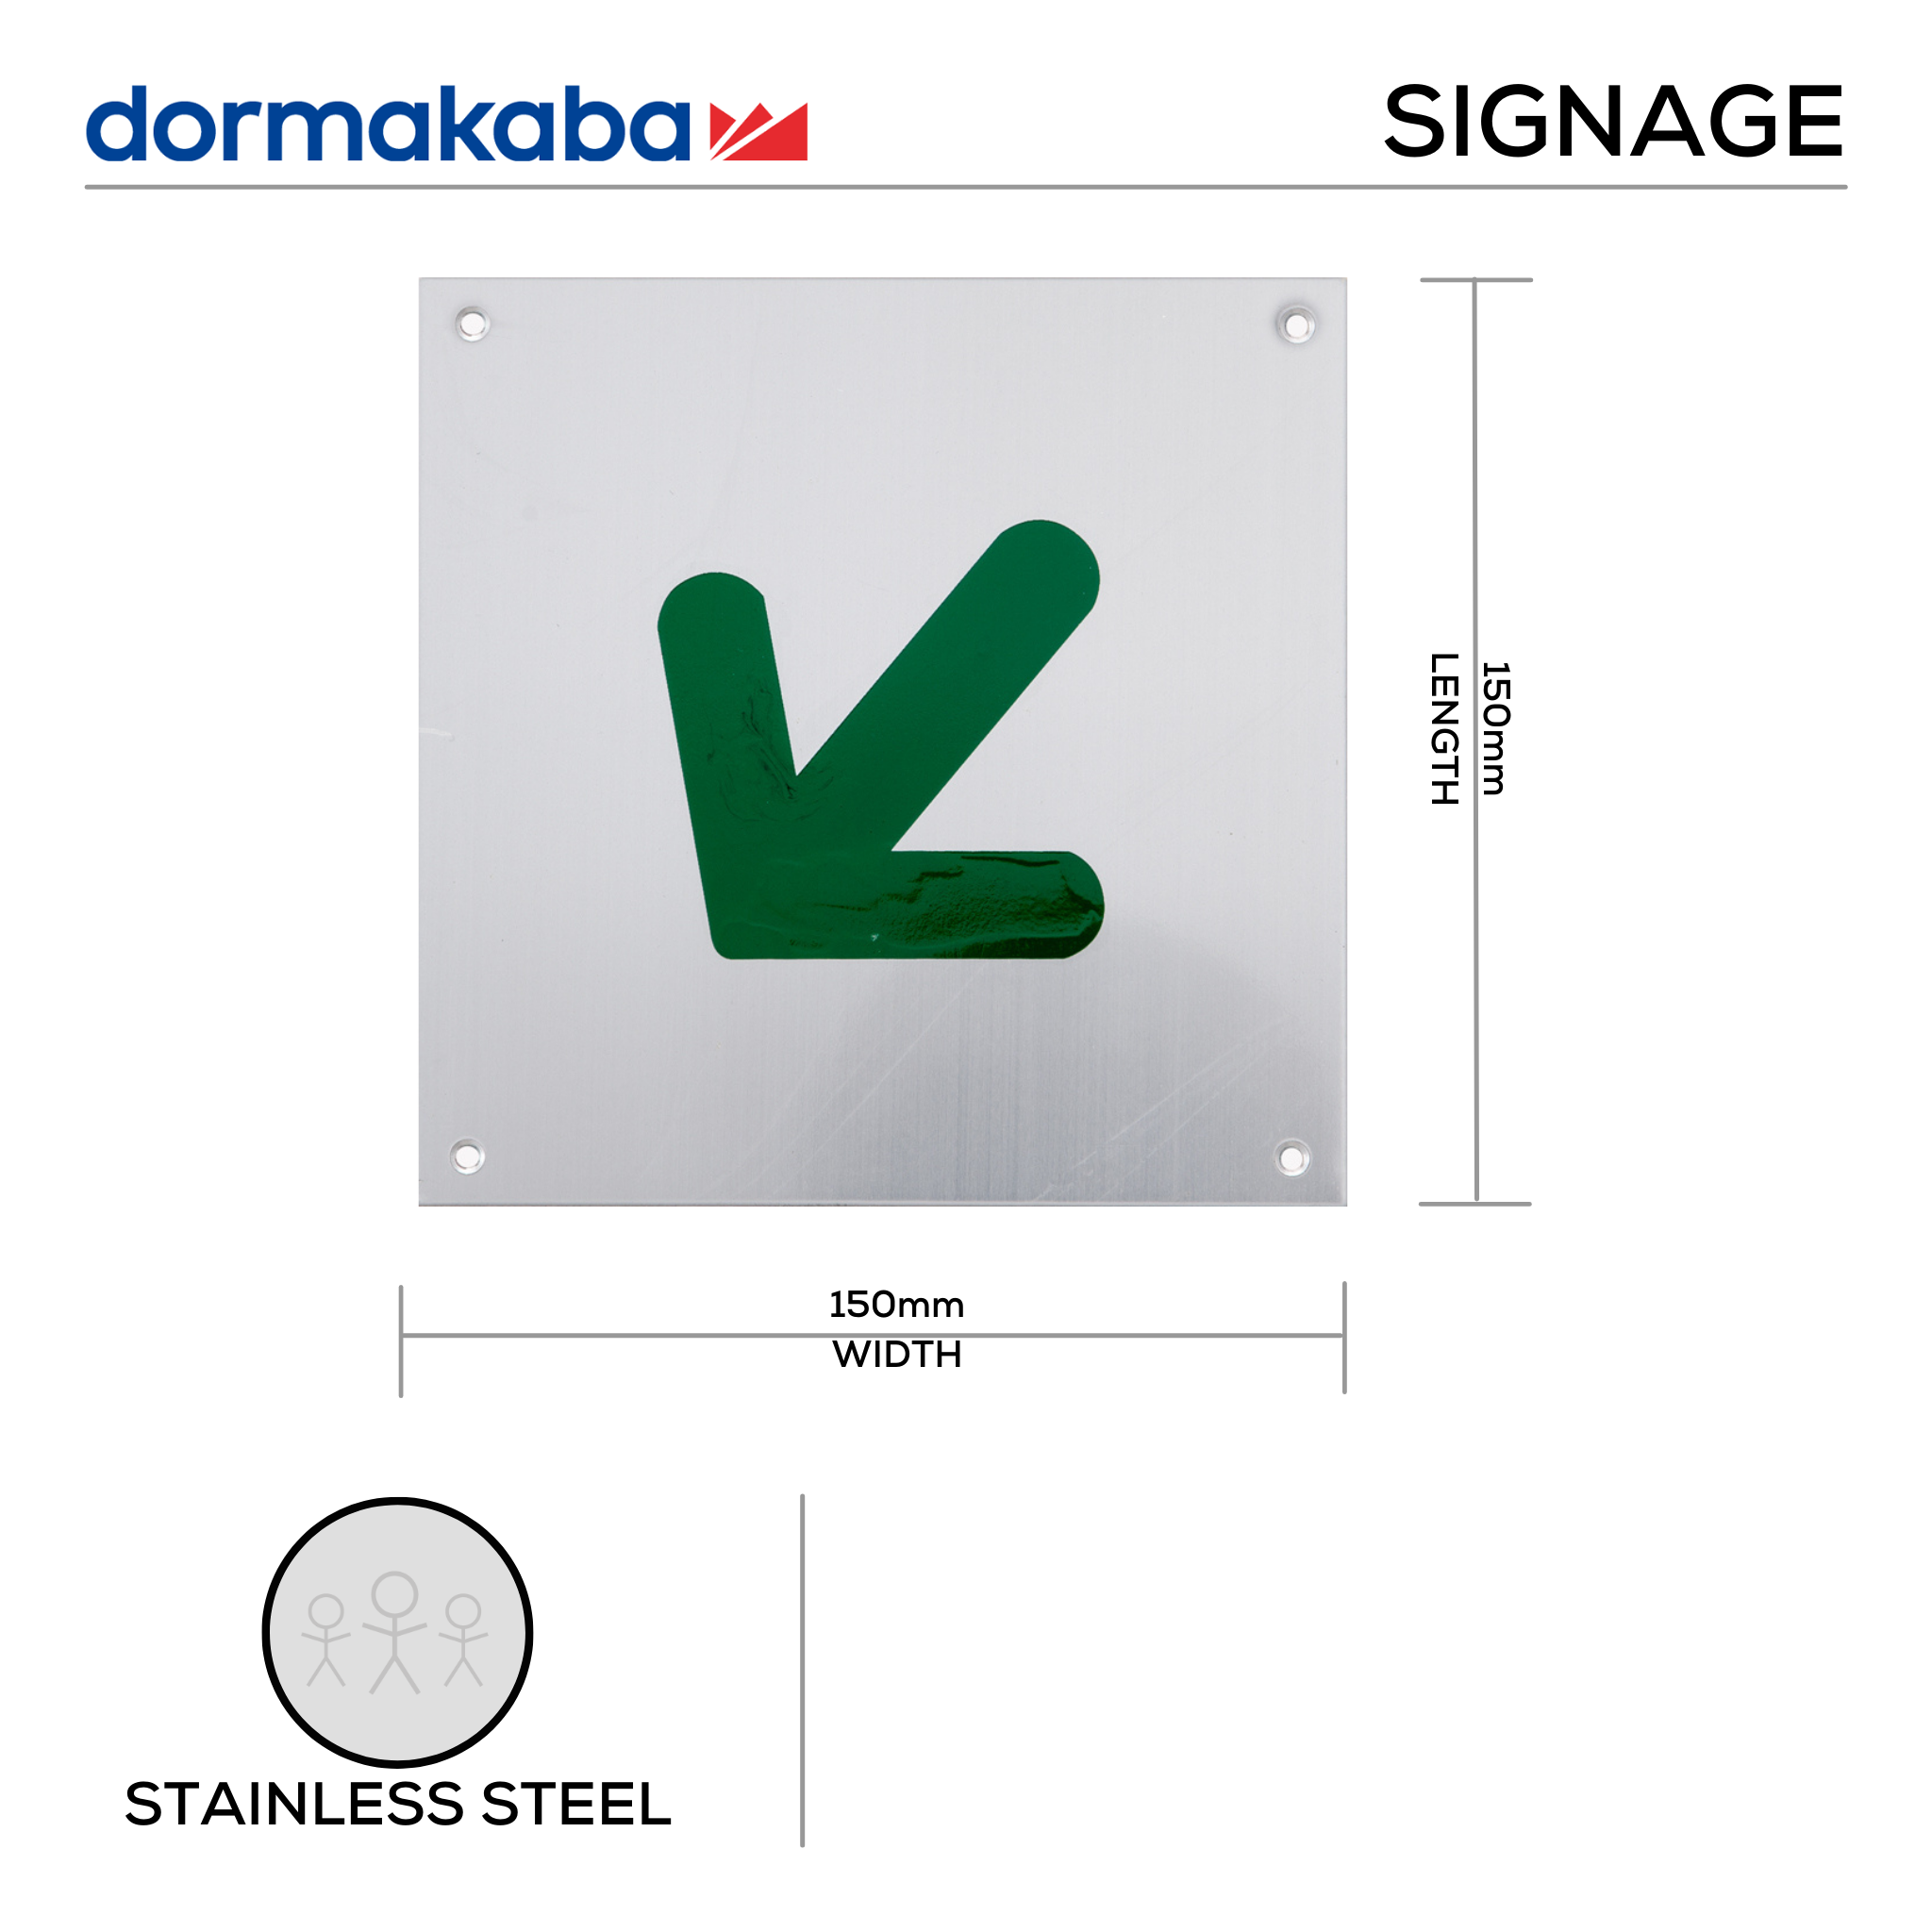 DSS-144, Door Signage, Angled Arrow , 150mm (l), 150mm (w), 1,2mm (t), Stainless Steel, DORMAKABA